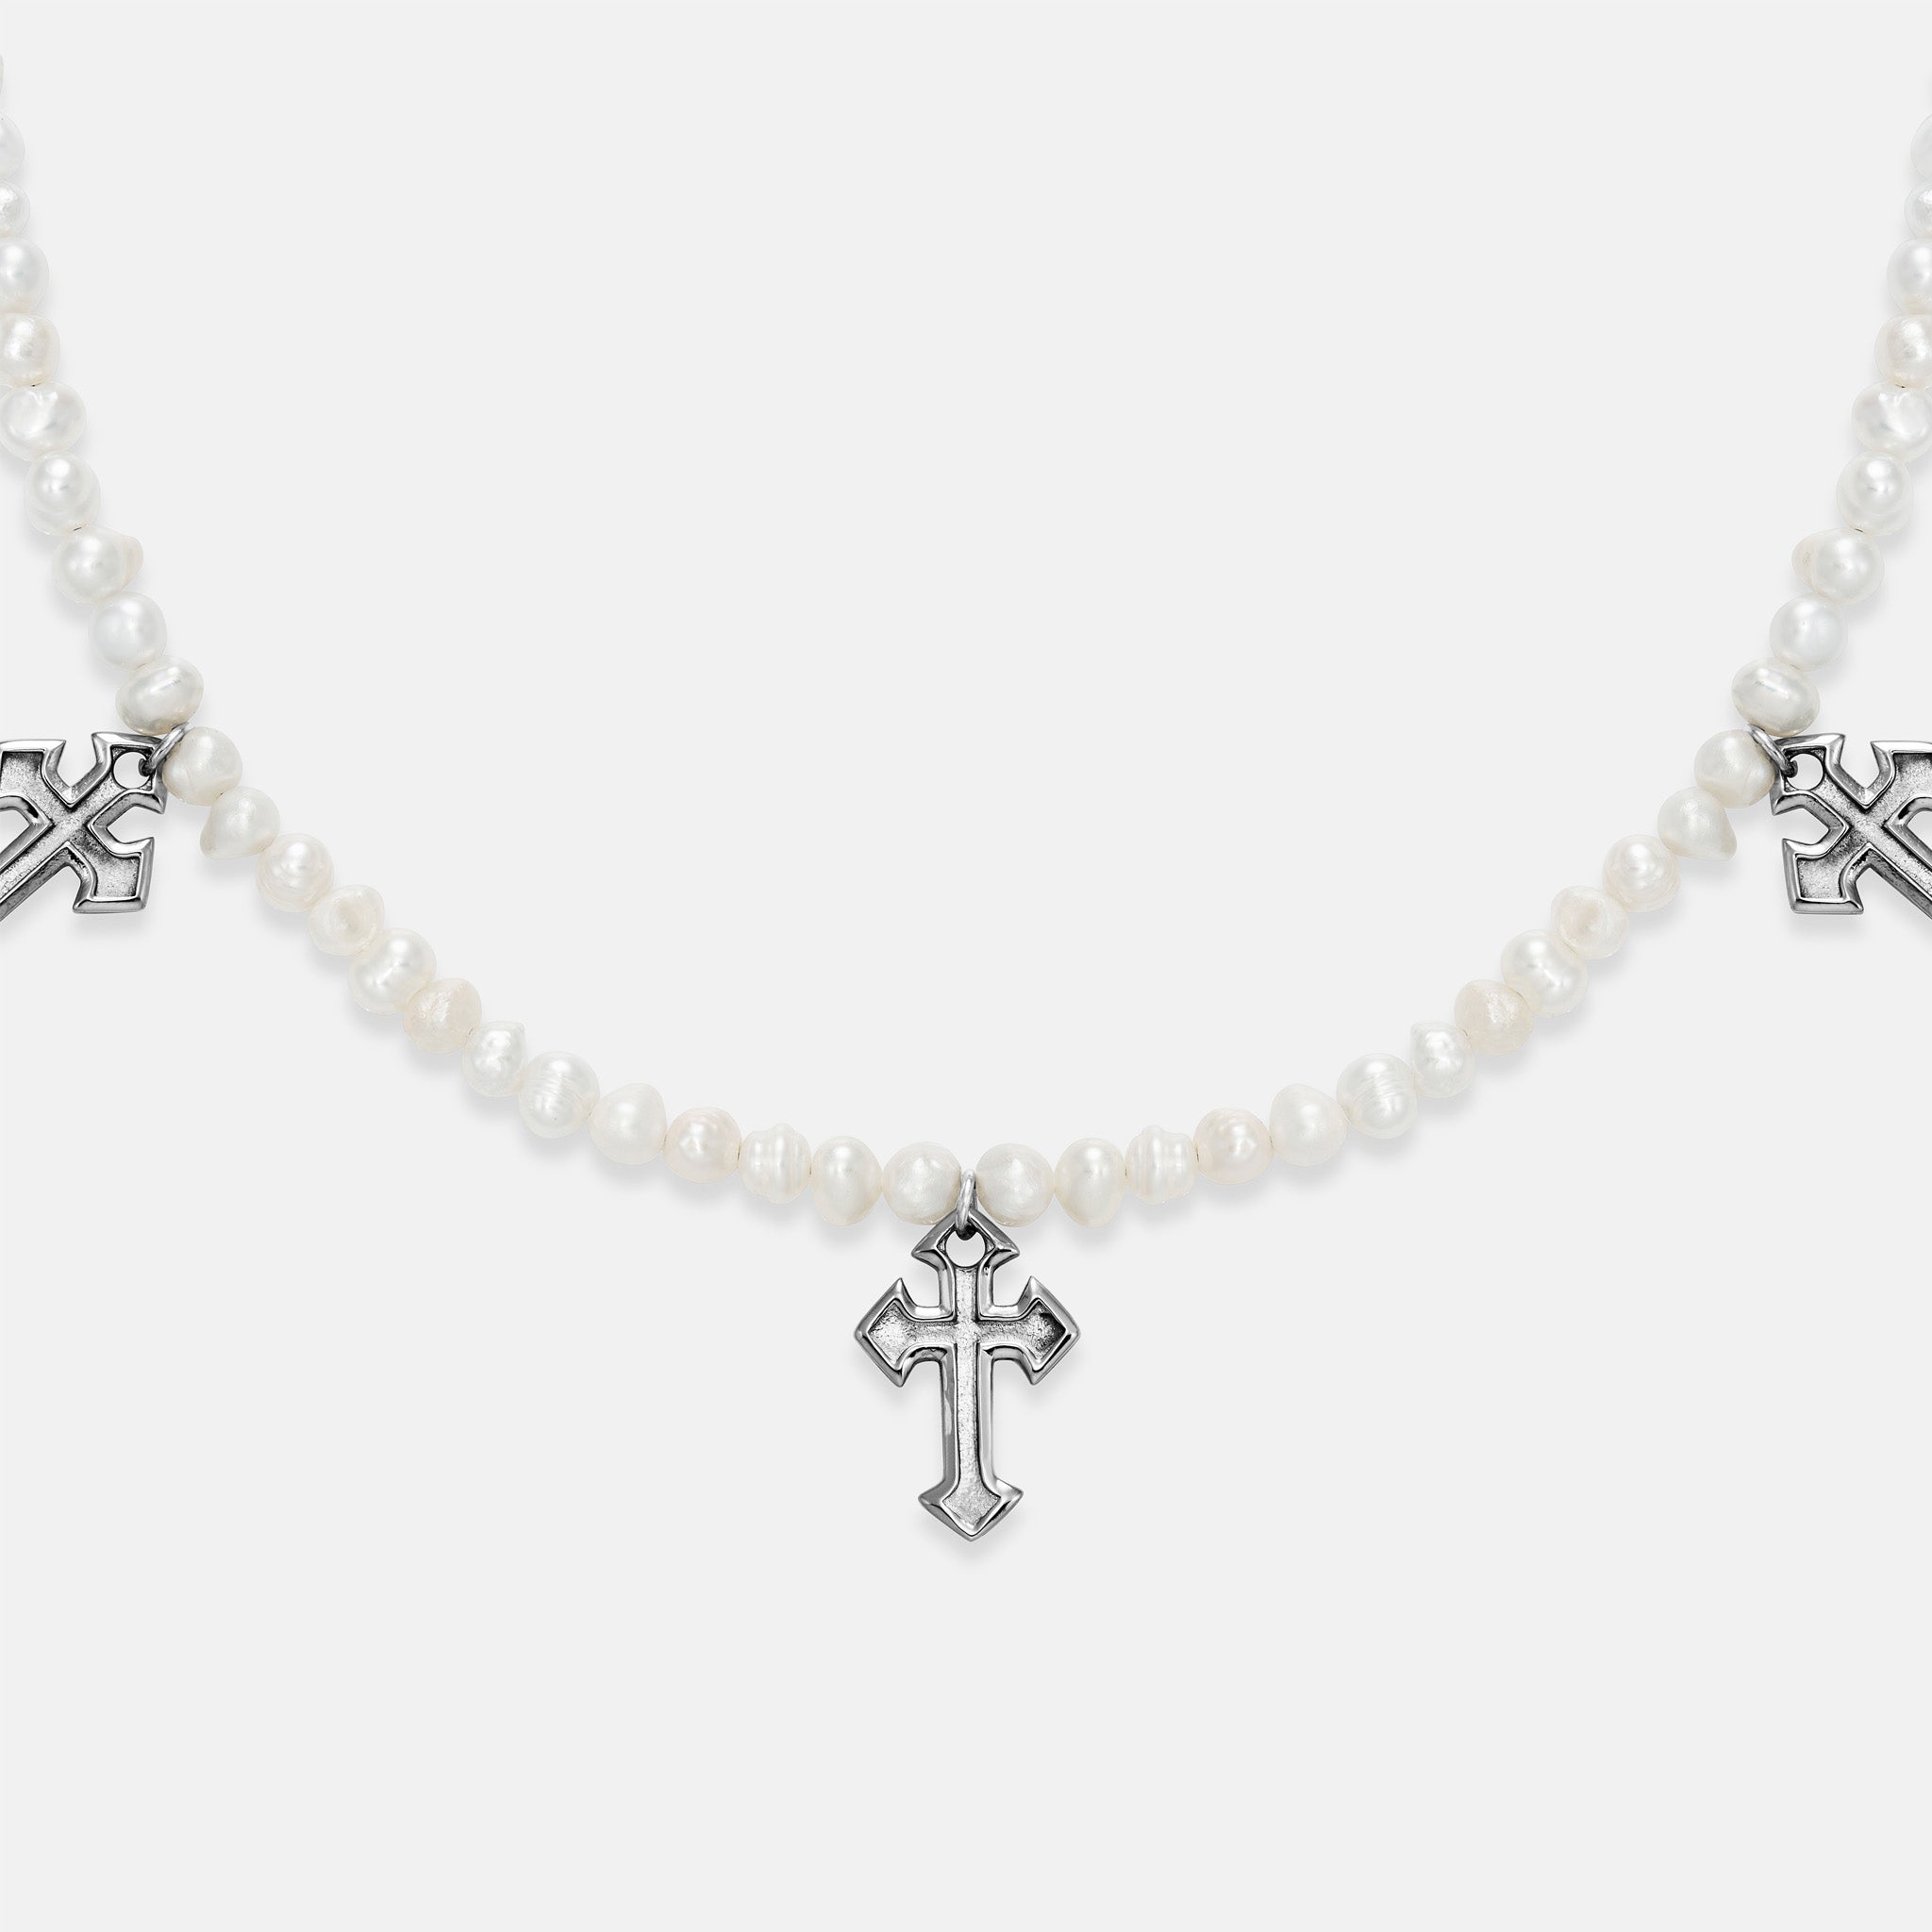 K12 - FRESHWATER PEARL GOTHIC CHAIN - 4MM